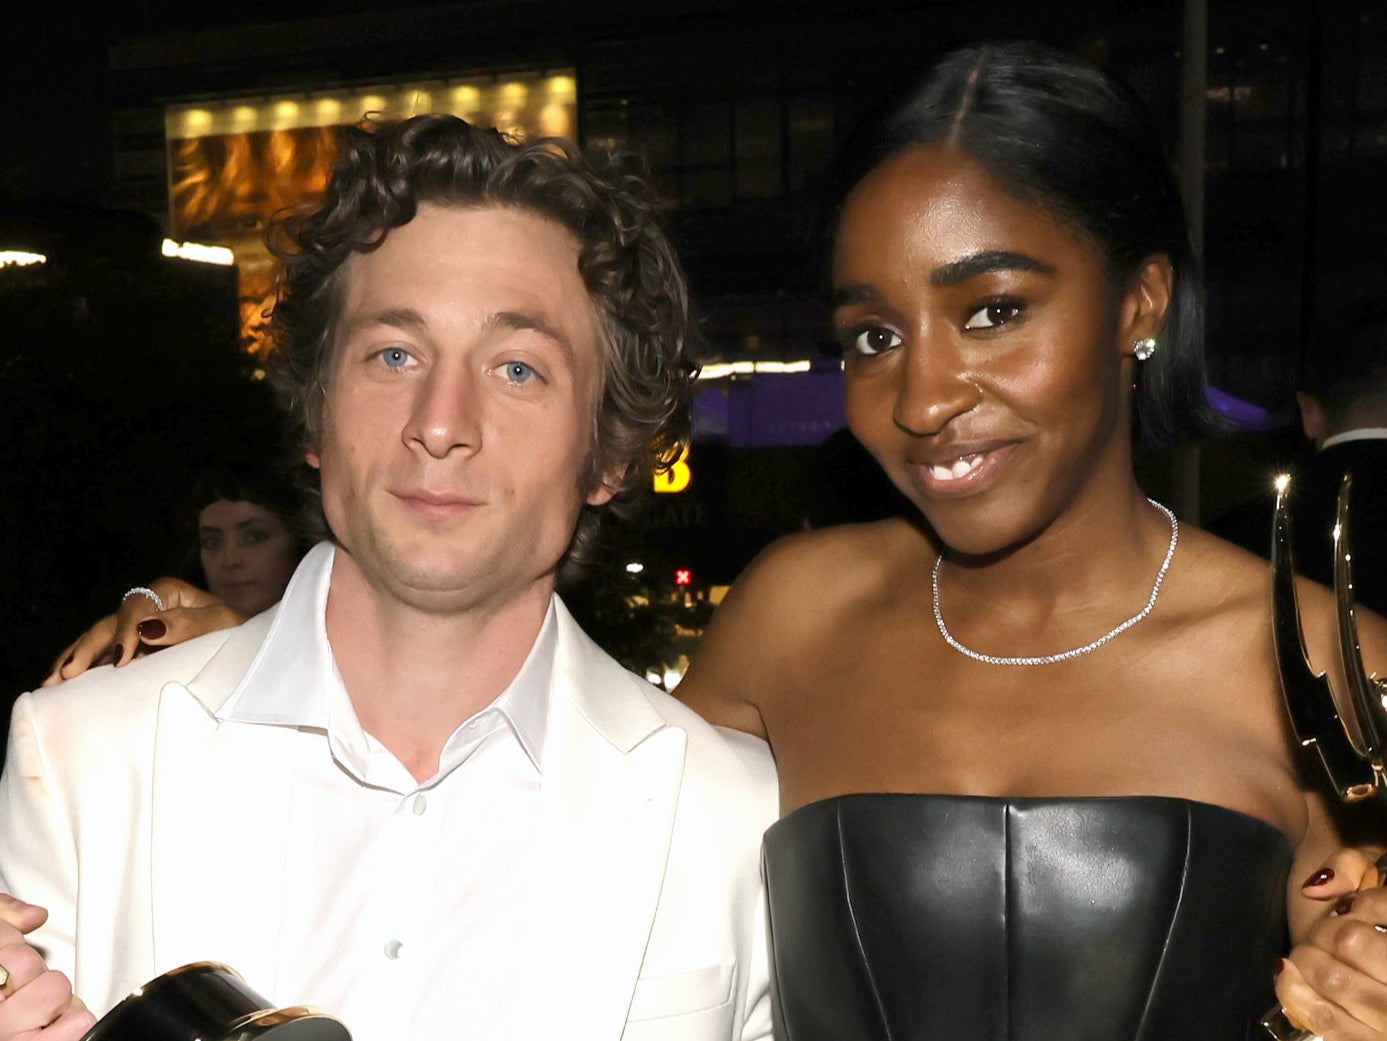 Jeremy Allen White speaks about his relationship with Ayo Edebiri amid dating rumours